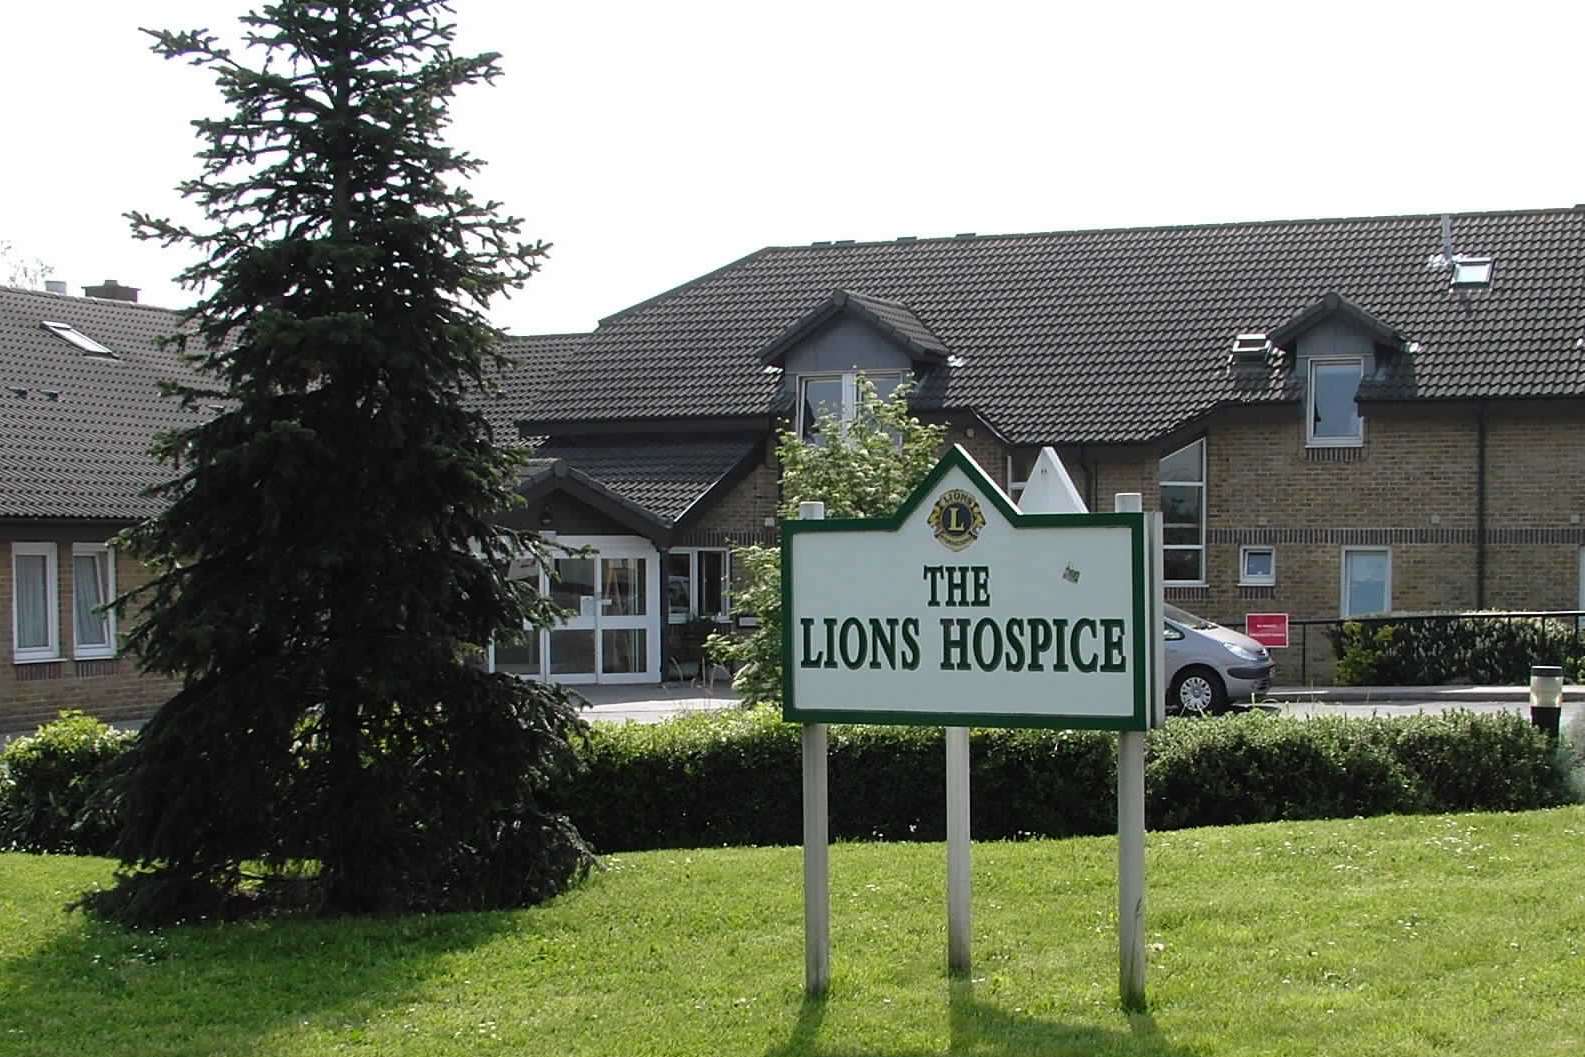 In June 1992 the Lions Hospice, as it was then, opened its doors.